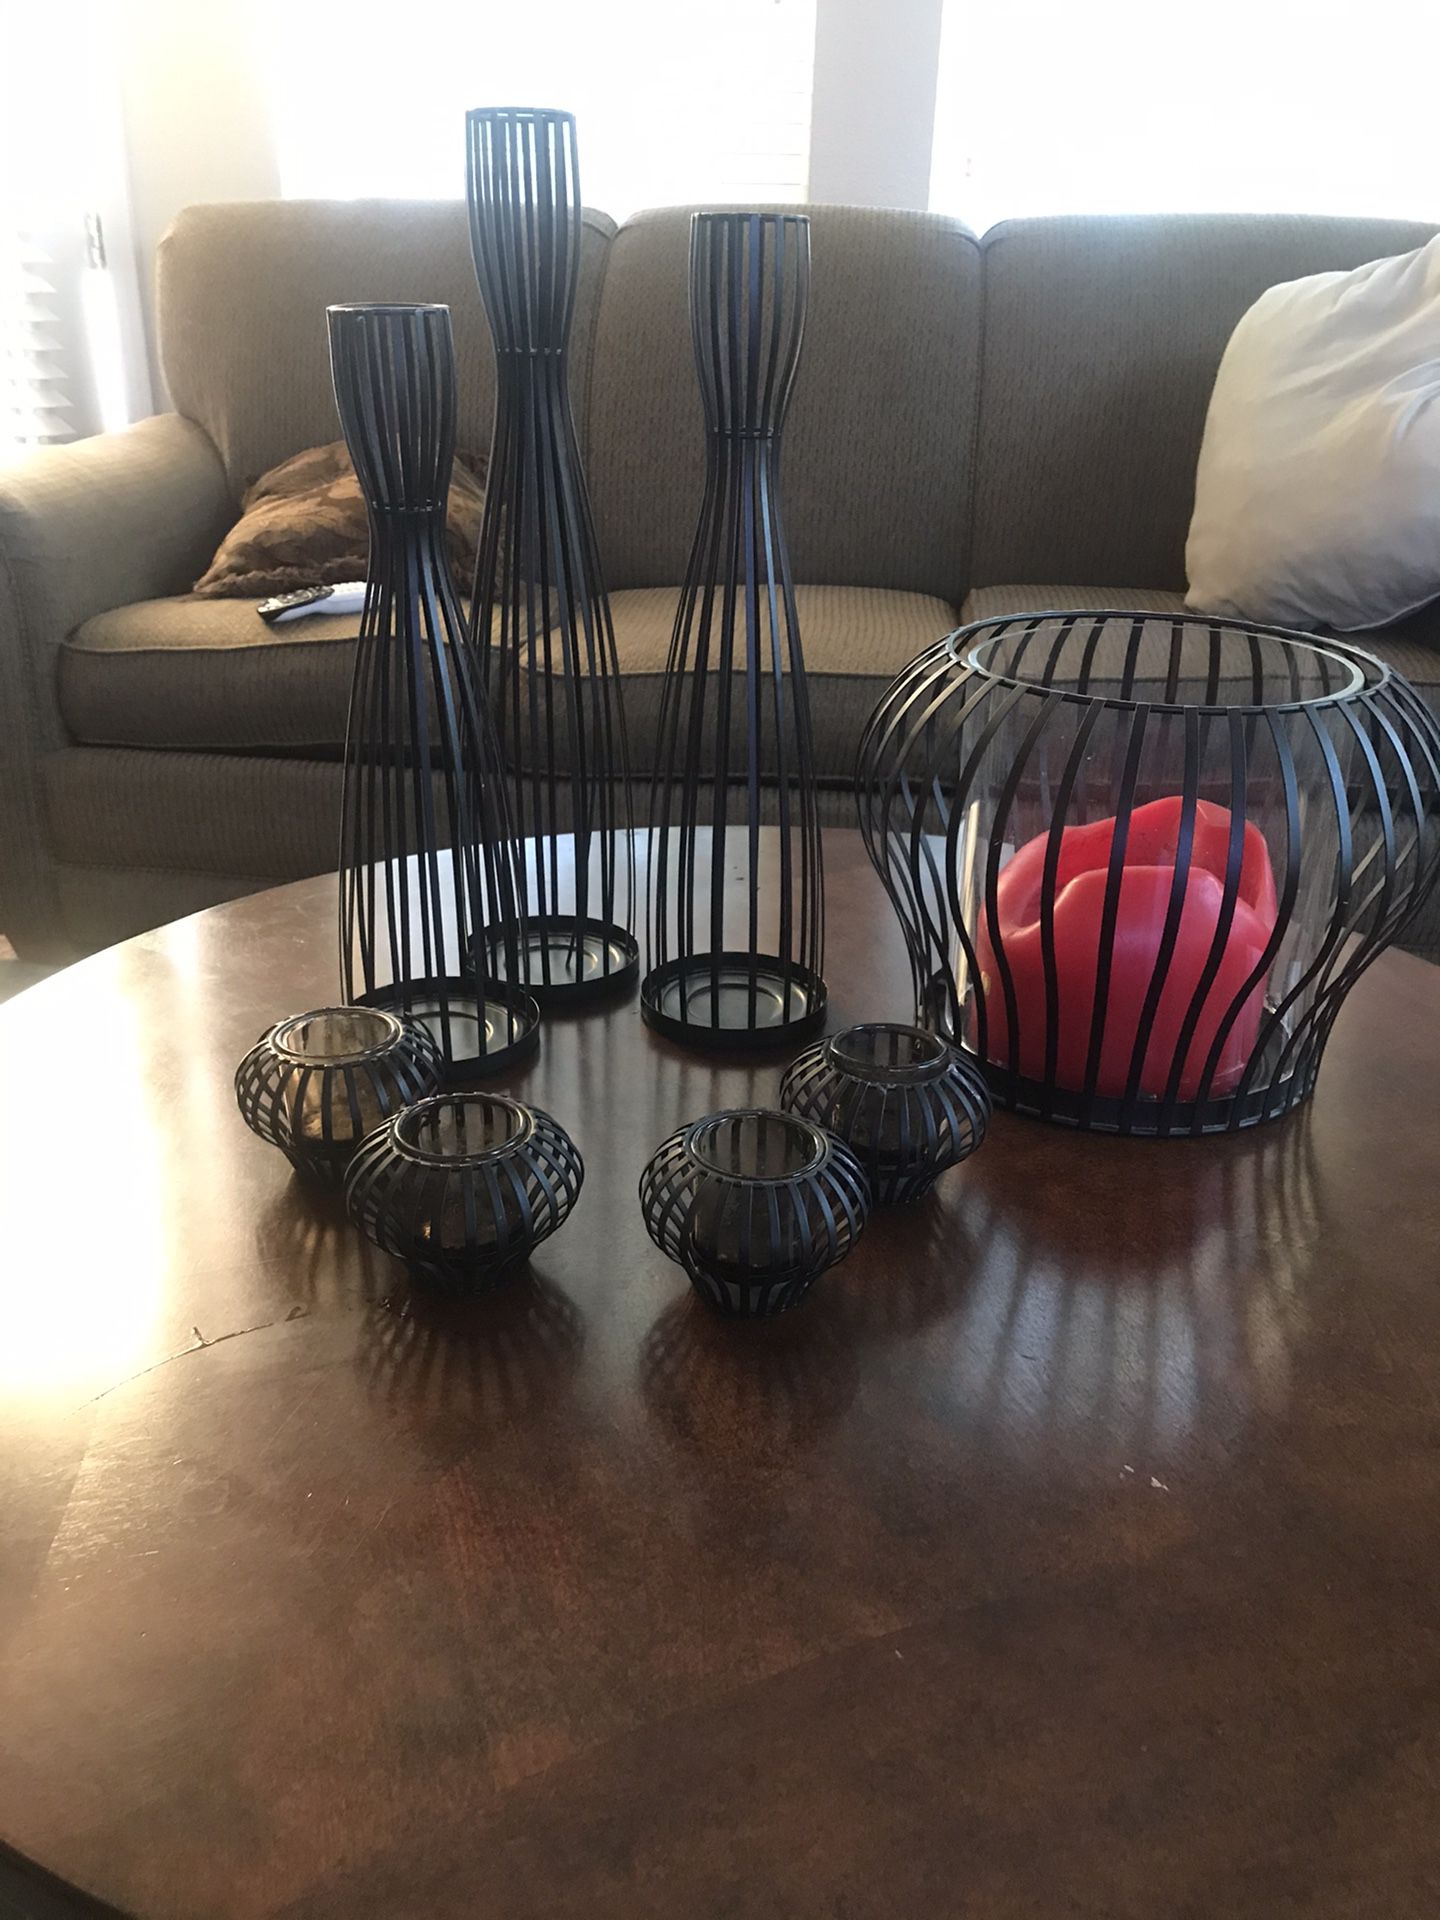 Partylite candle holders